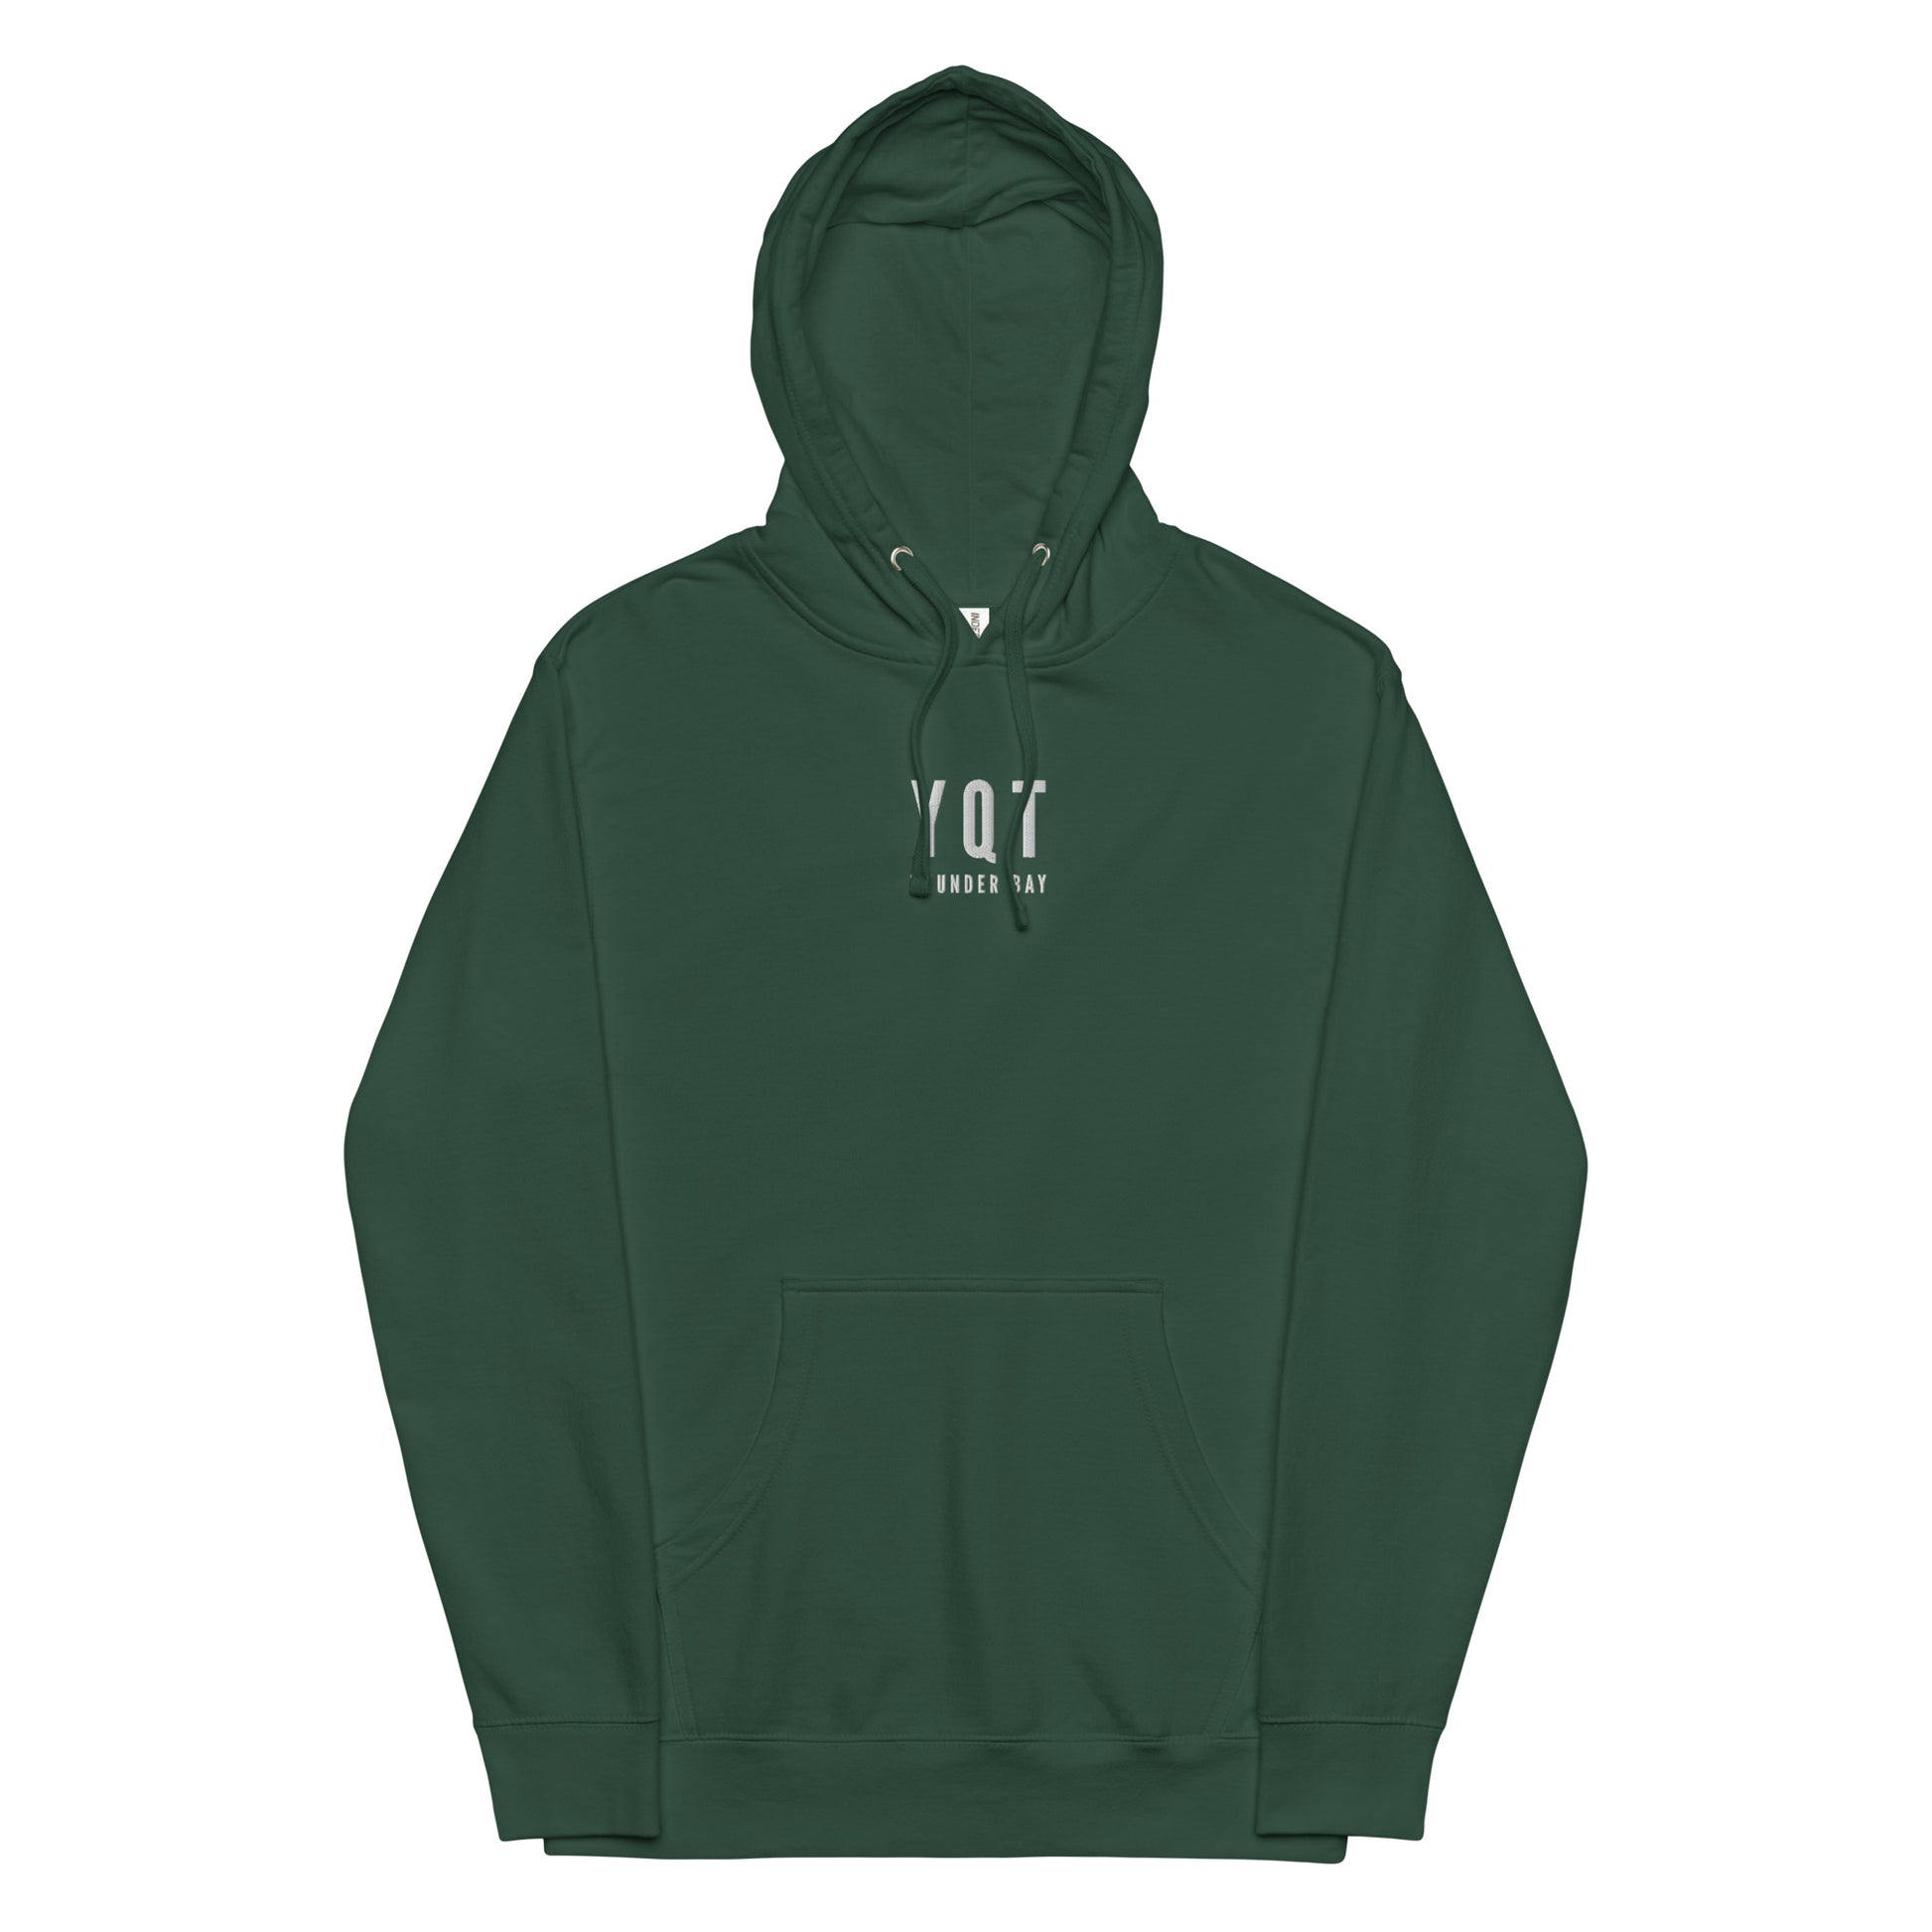 City Midweight Hoodie - White • YQT Thunder Bay • YHM Designs - Image 13